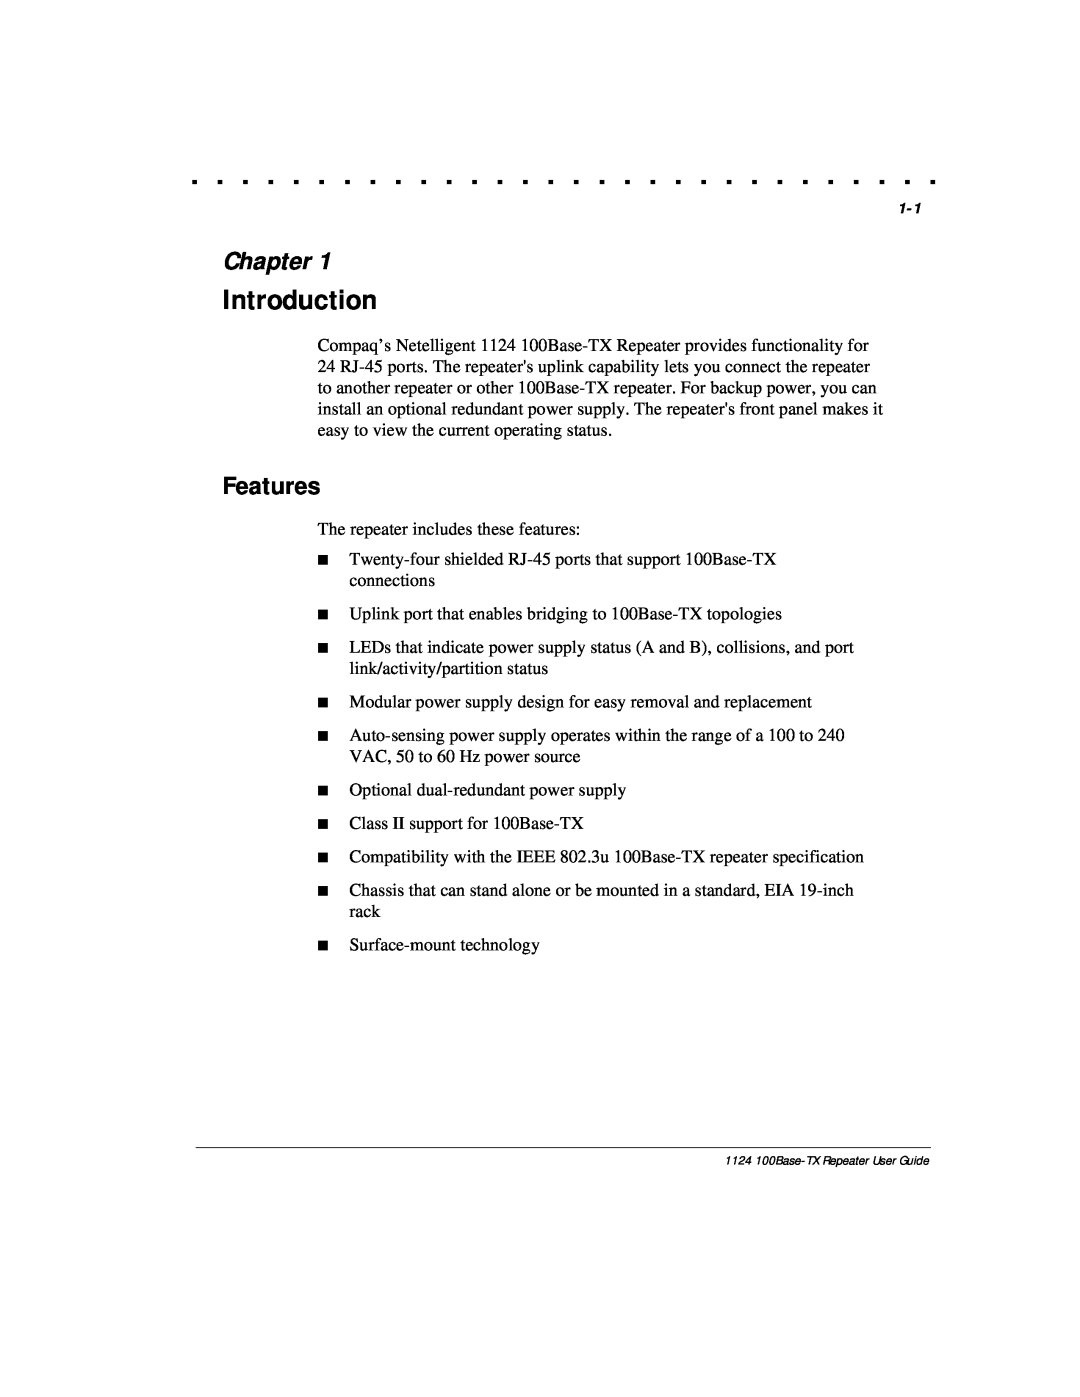 Compaq 1124 manual Introduction, Chapter, Features 